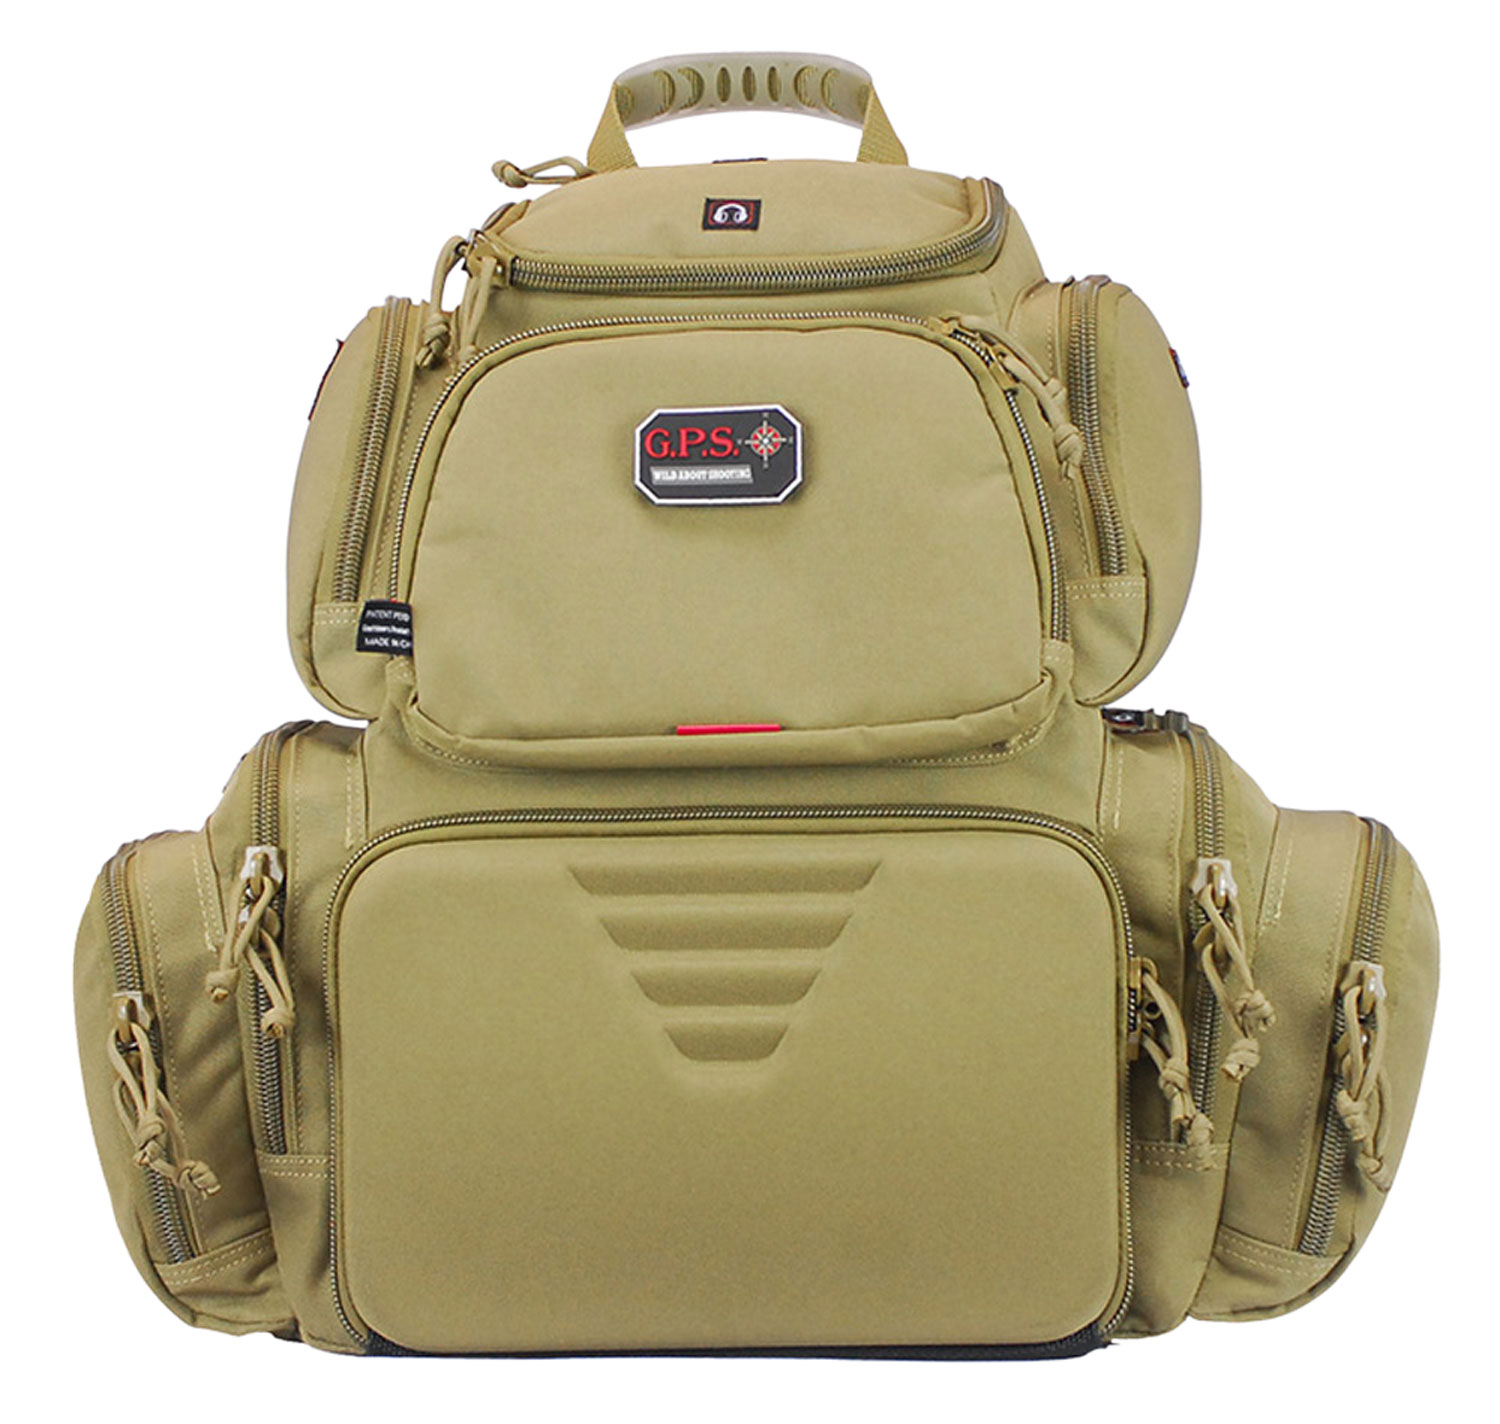 G*Outdoors 1711BPT Handgunner Backpack 1000D Nylon Tan with Foam Cradle Holds 4 Medium Handguns, Mag Pockets, Pull-Out Rain Cover & Visual ID Storage System